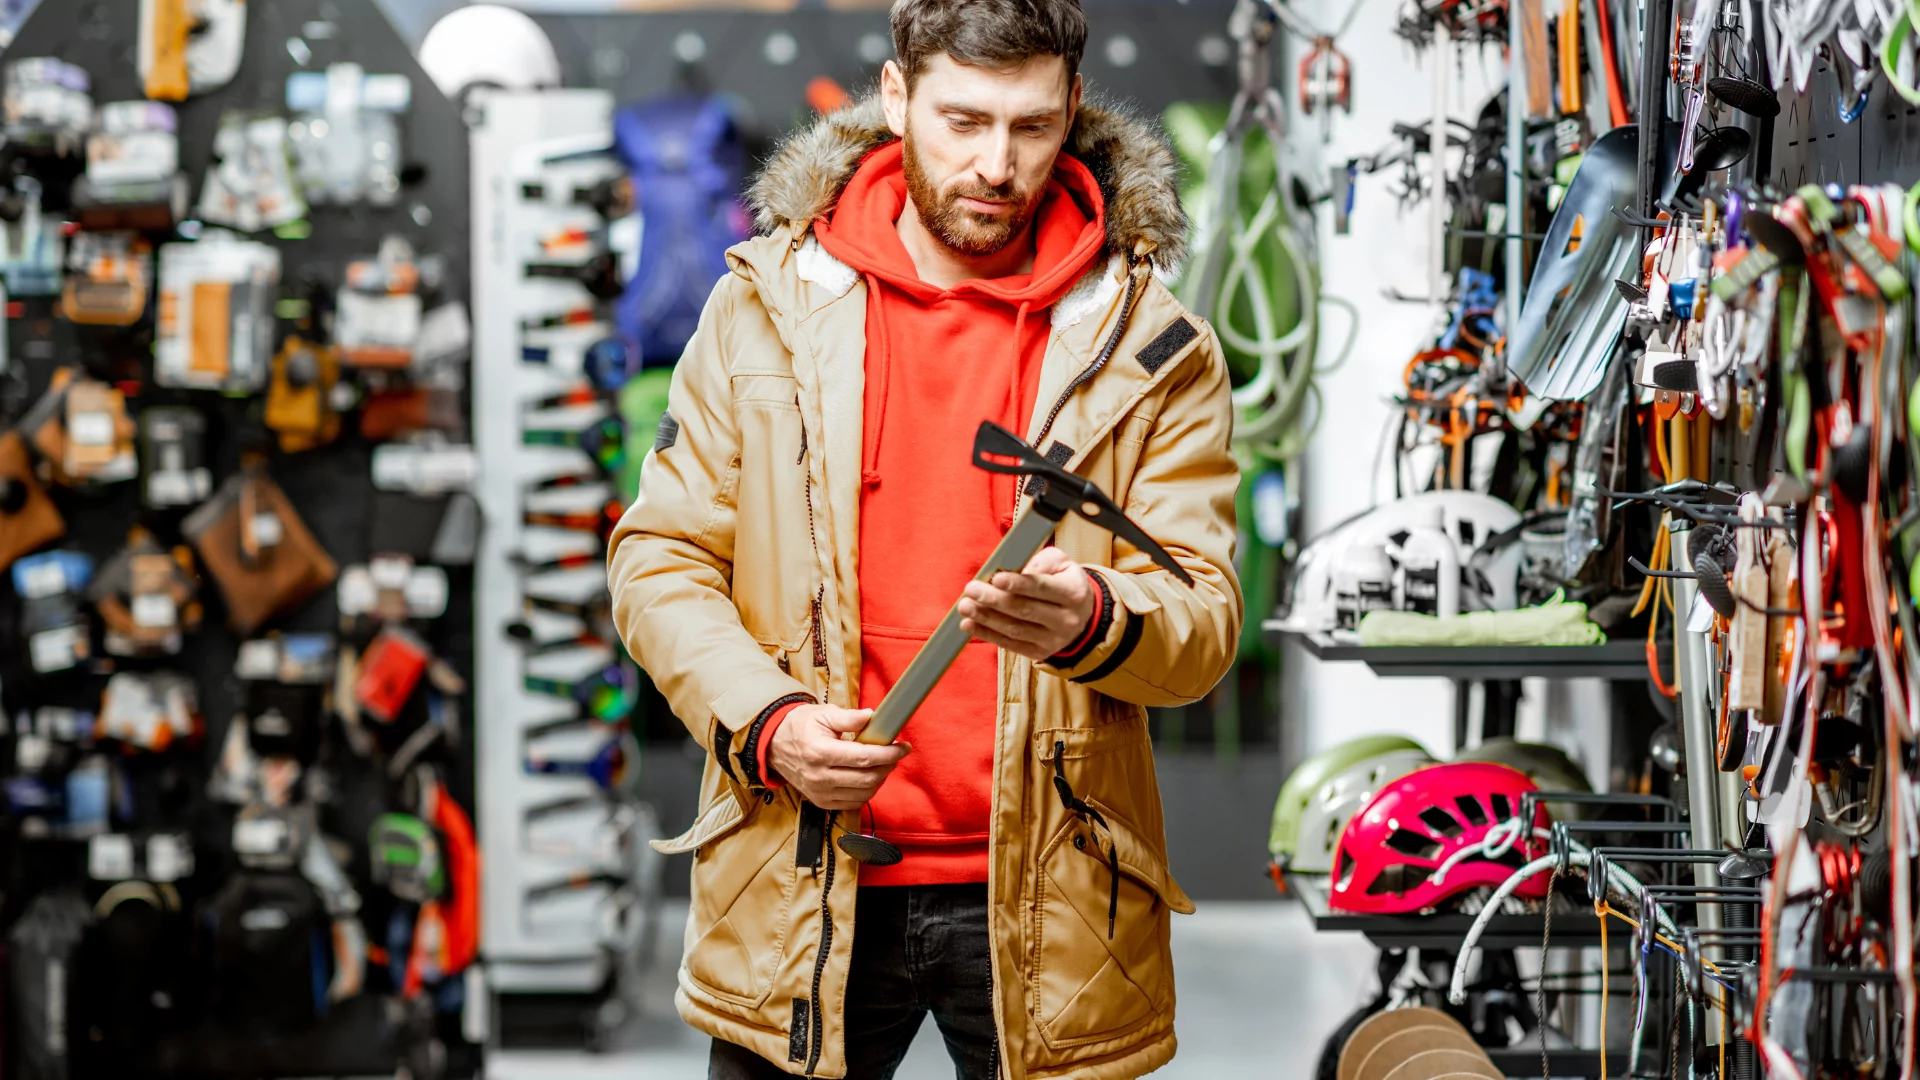 A man shops for mountaineering equipment